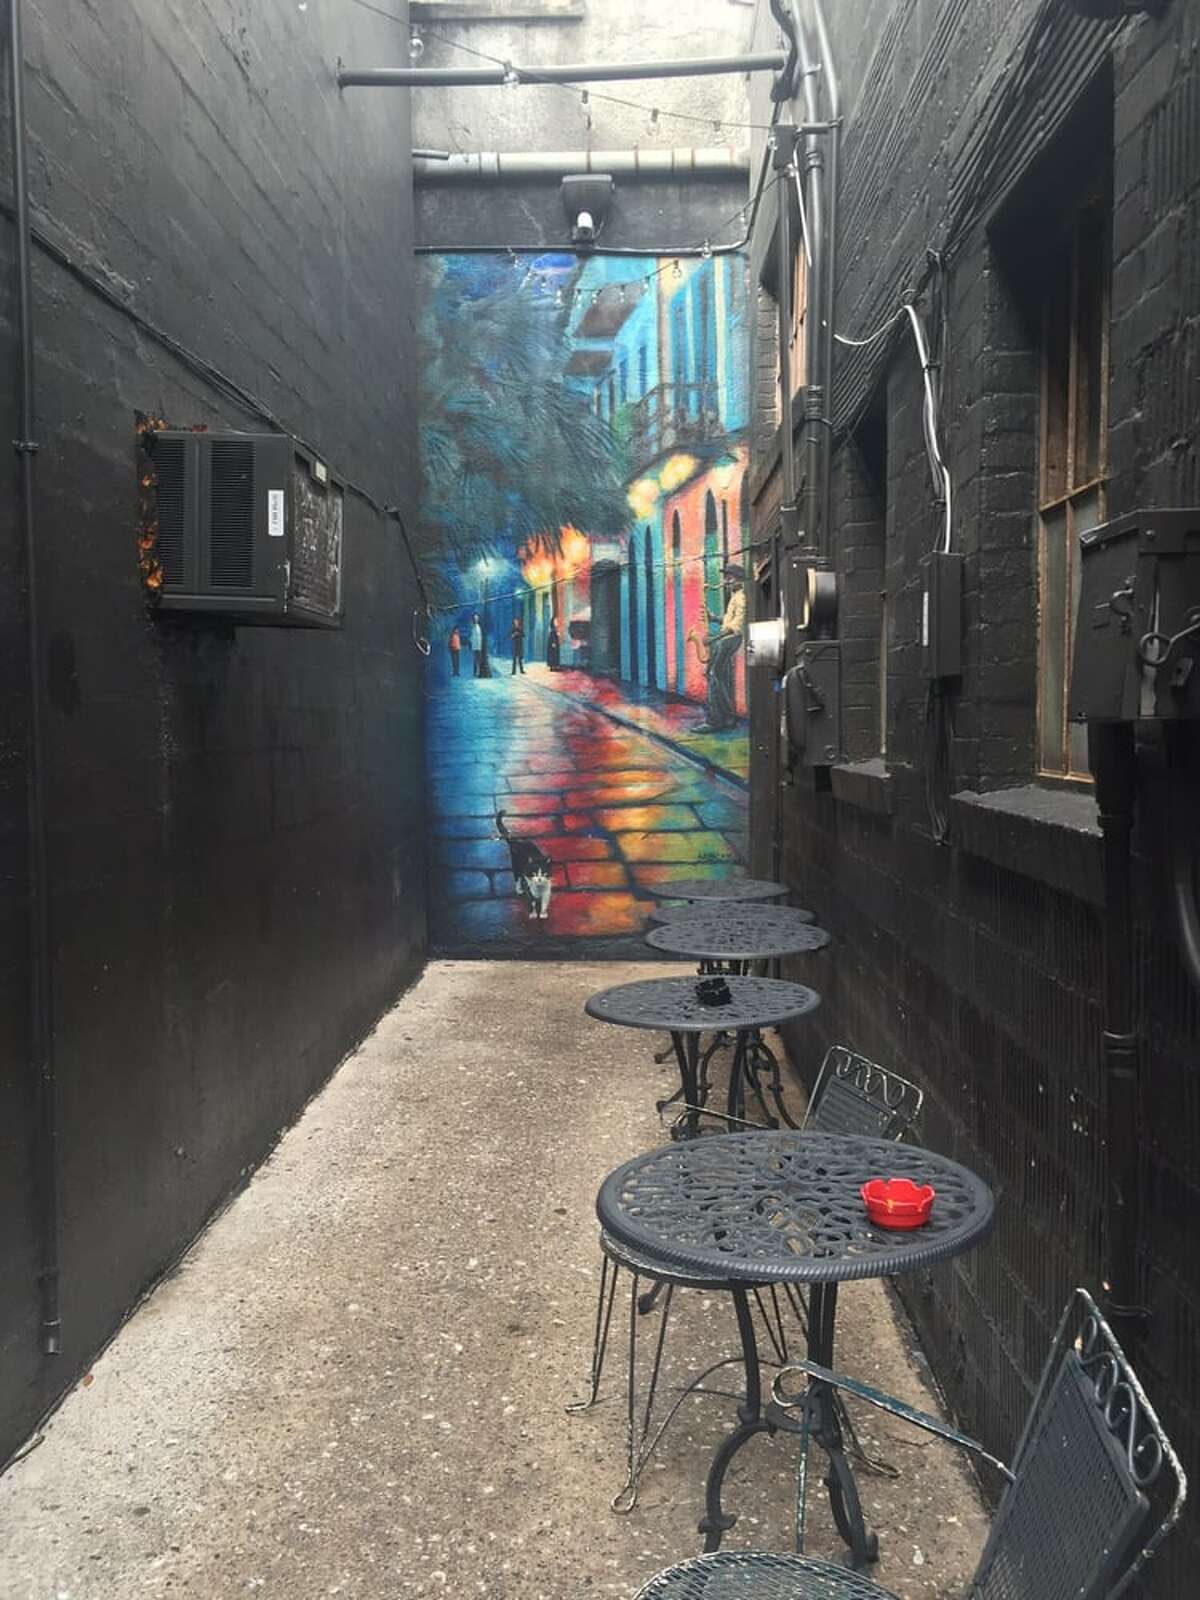 The pop-up’s first featured guest is The Alley Kat. The Midtown bar will take over the outside area on Thursday at 6 p.m. DJ Big Reeks + The Waxaholics will spin tunes and social distance will be maintained in the open-air space.